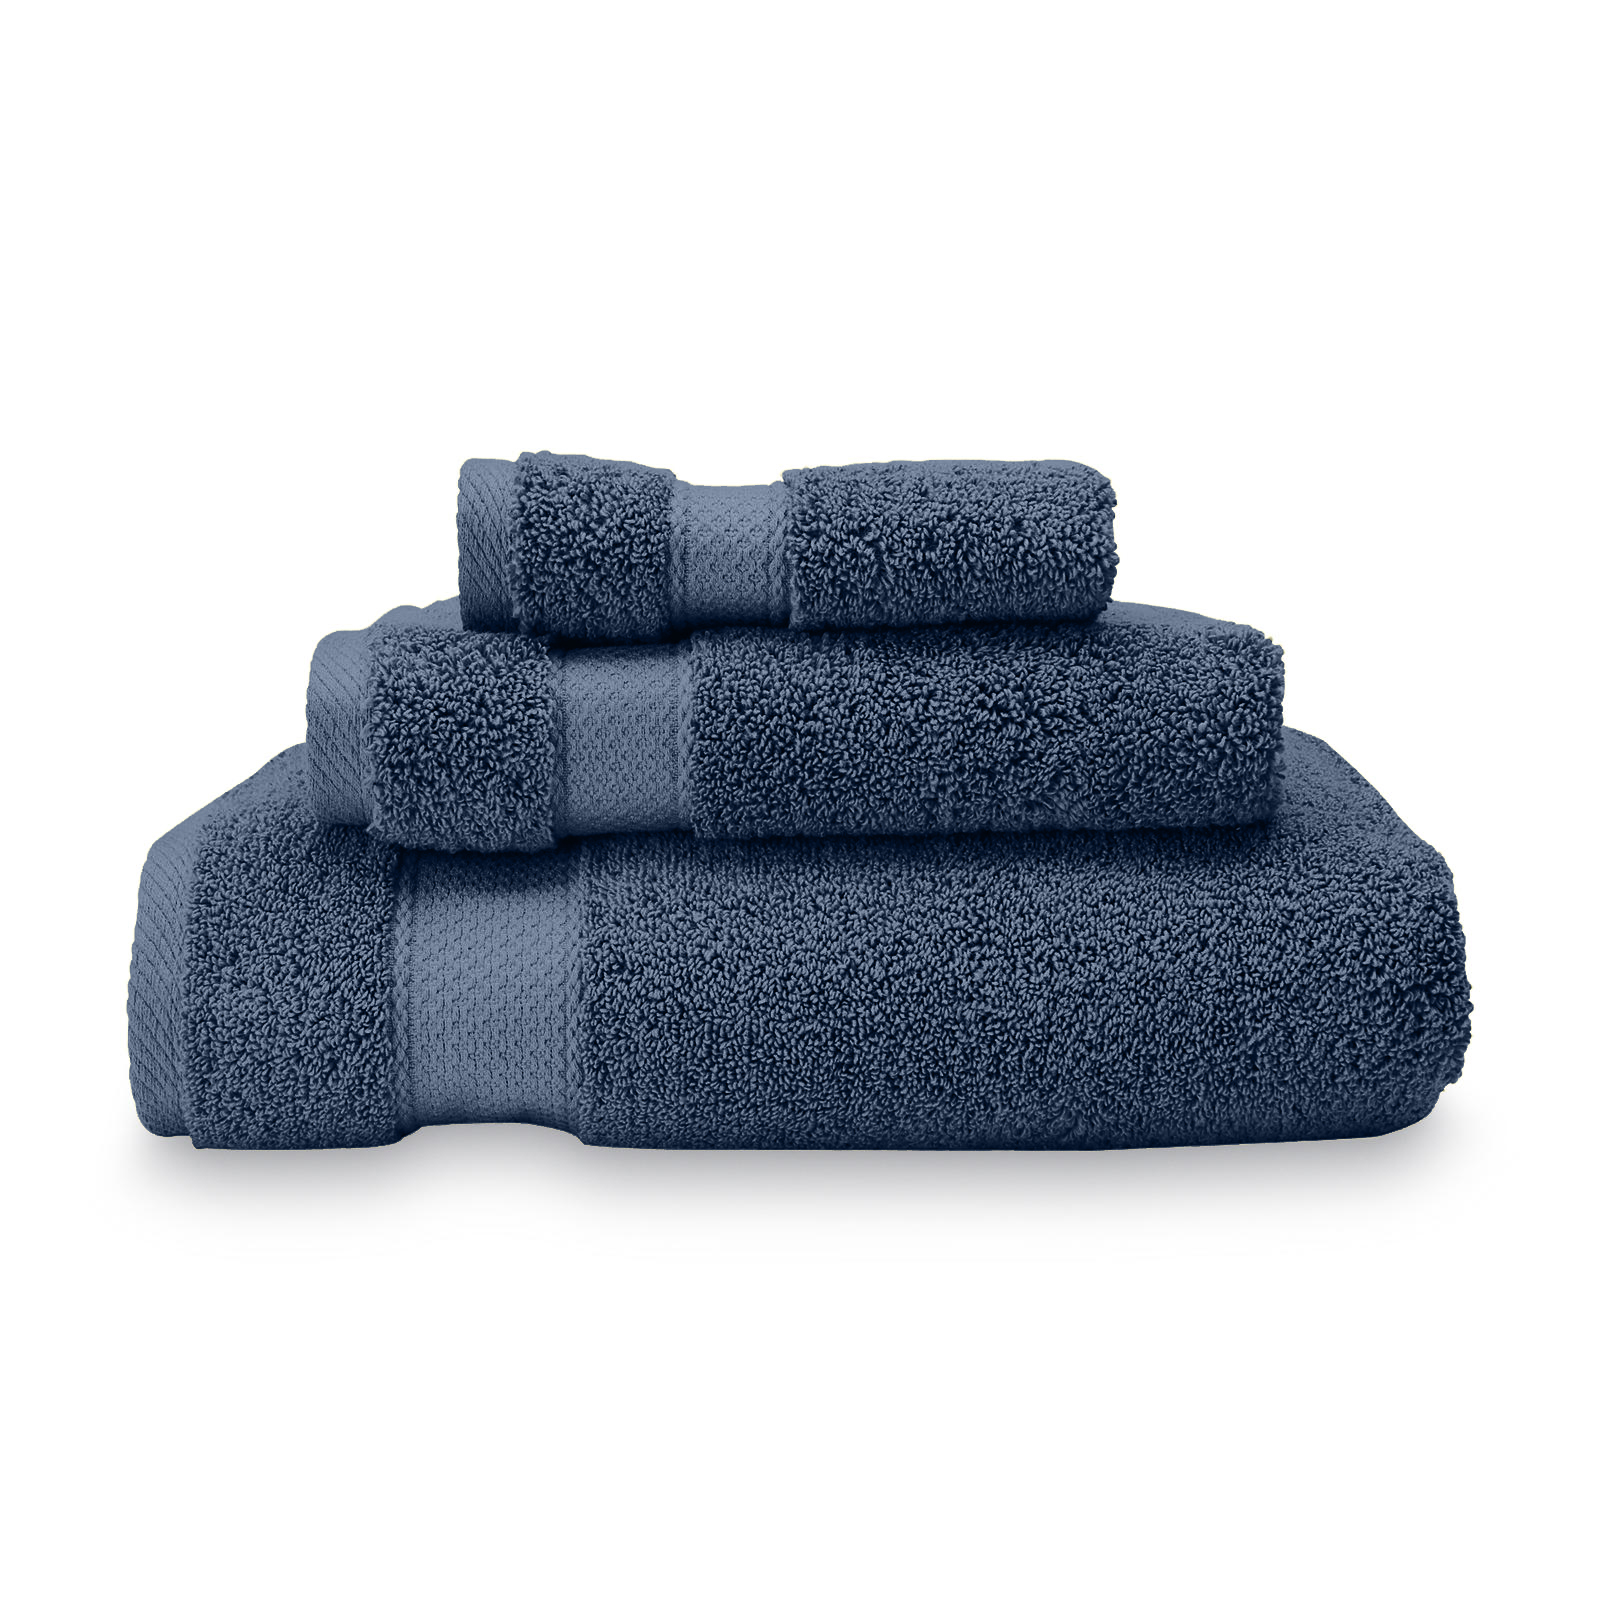 Cannon Egyptian Cotton Bath Towels  Hand Towels or Washcloths